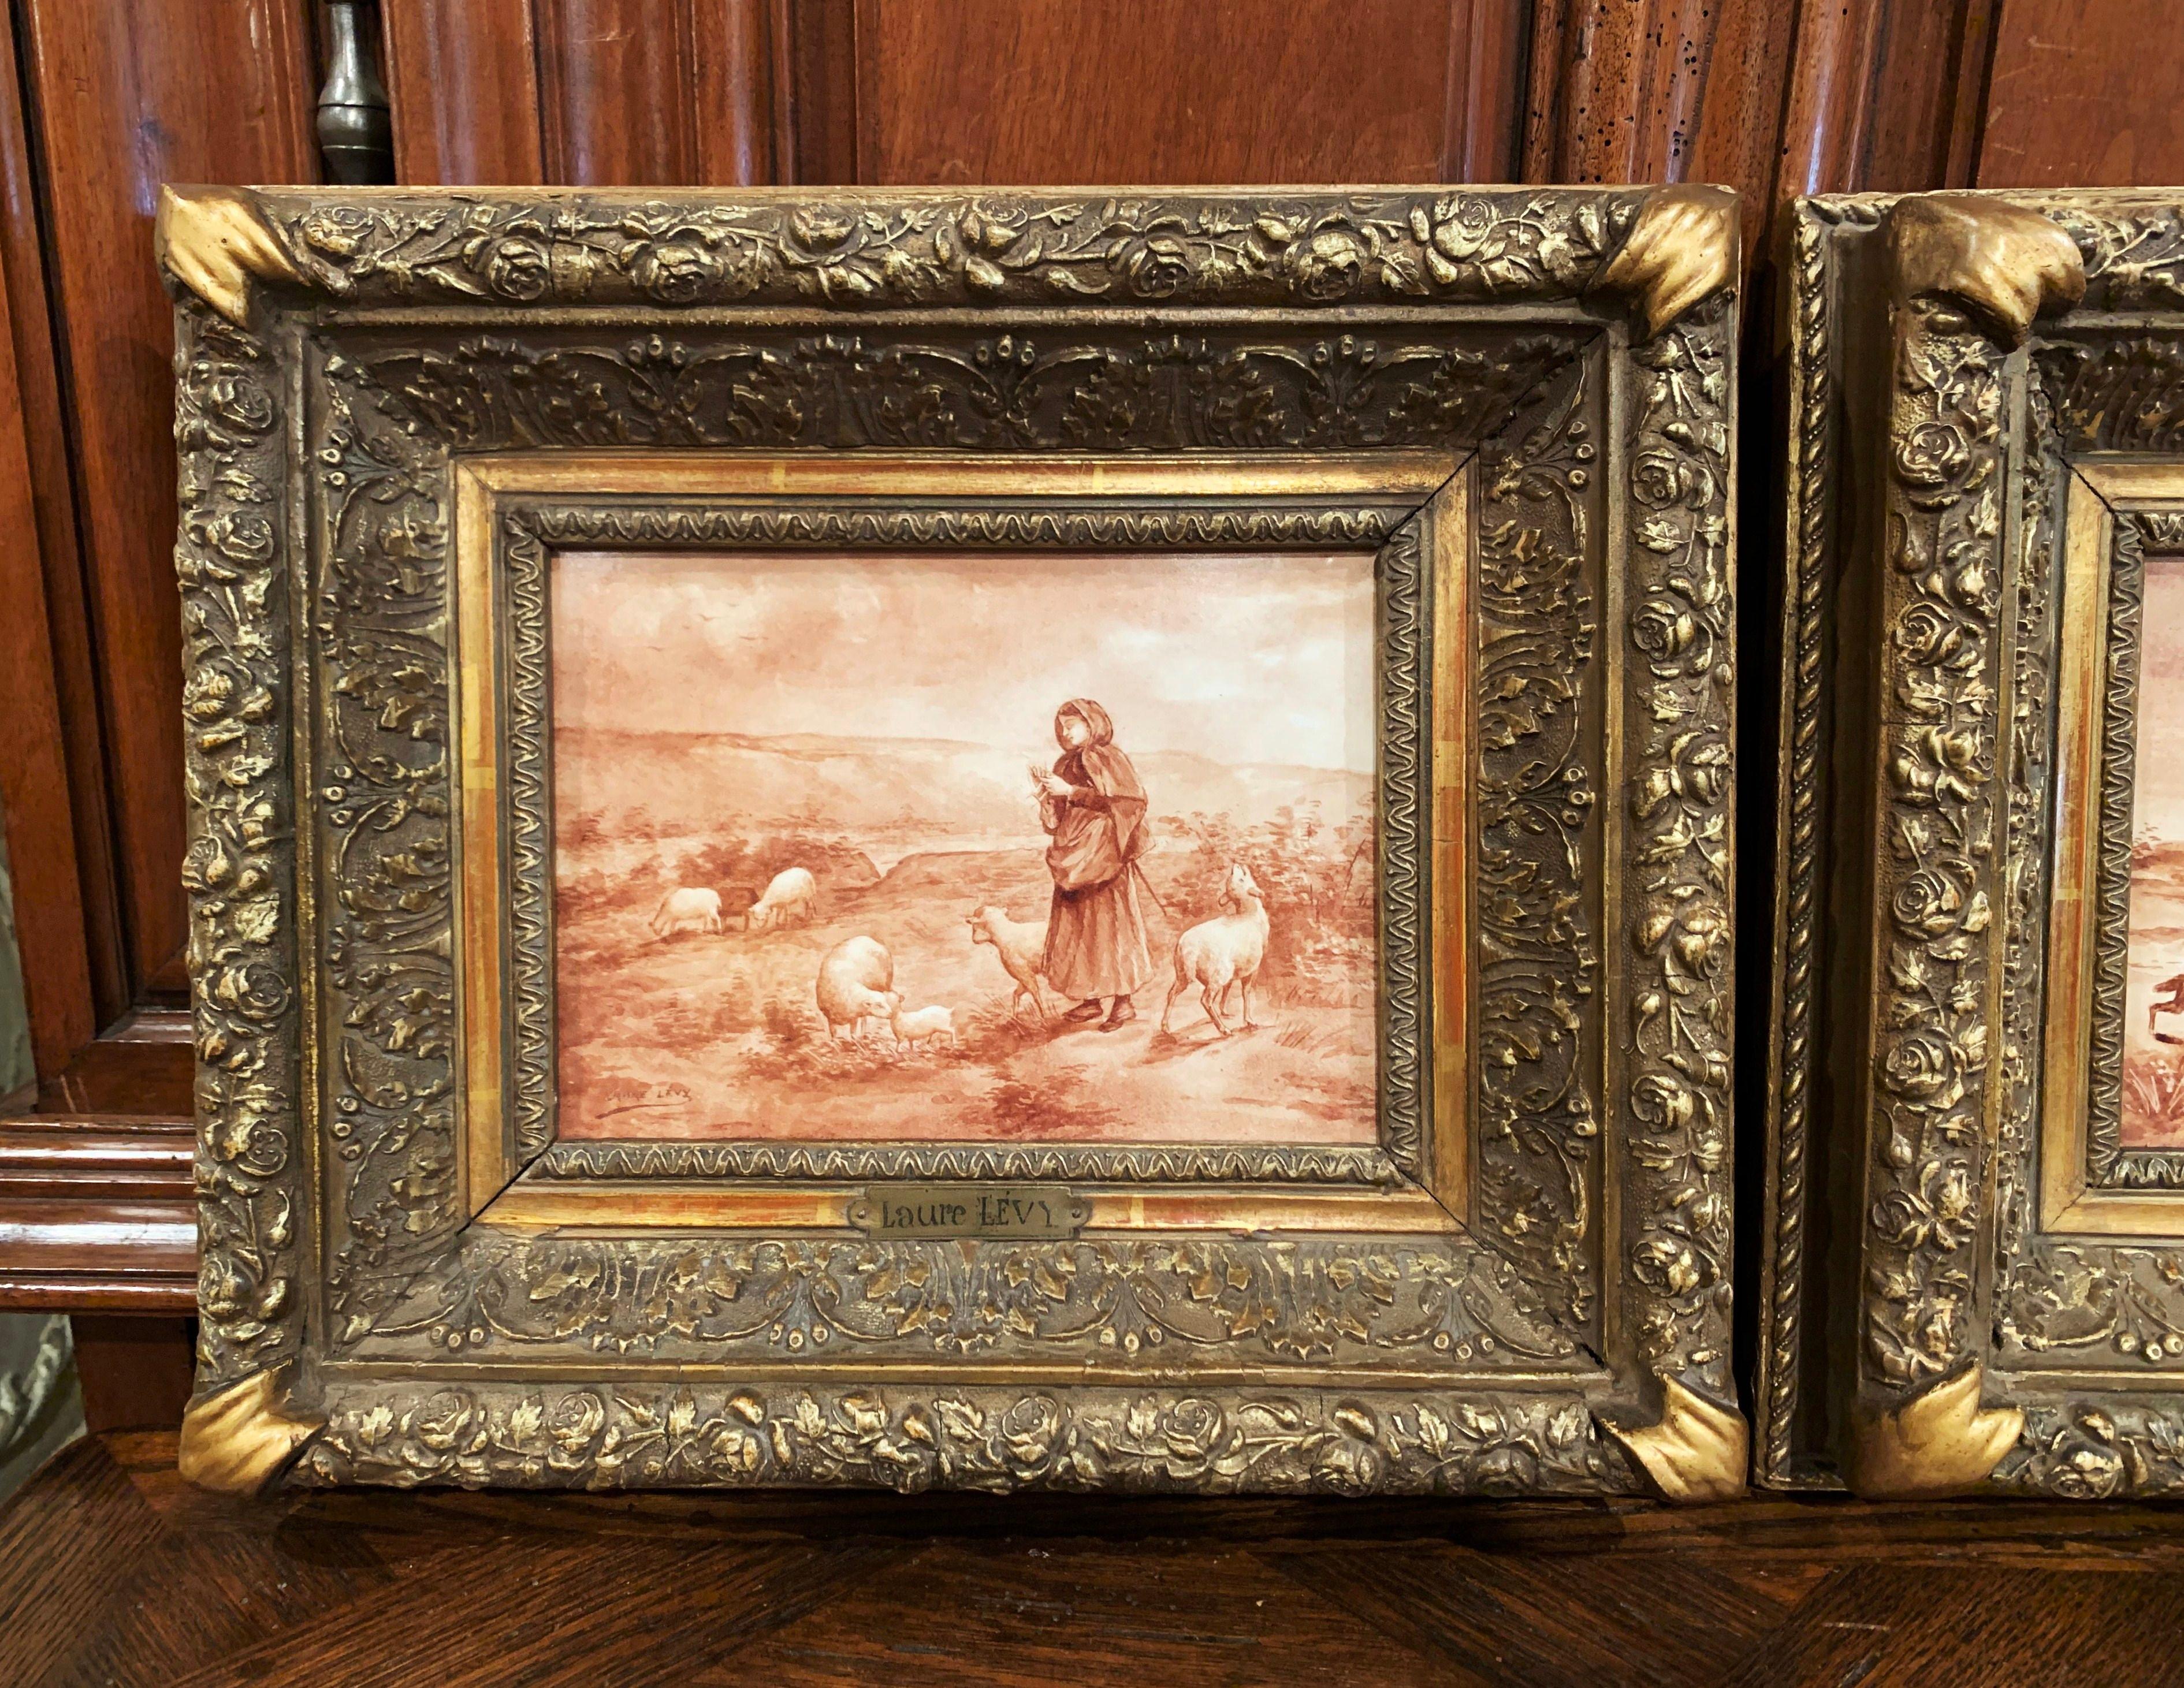 Crafted in France circa 1890, and set in the original carved giltwood frames, both antique porcelain plaques depict a hand painted pastoral scene in the beige and white palette. One painting features a shepherdess attending her sheep, the other